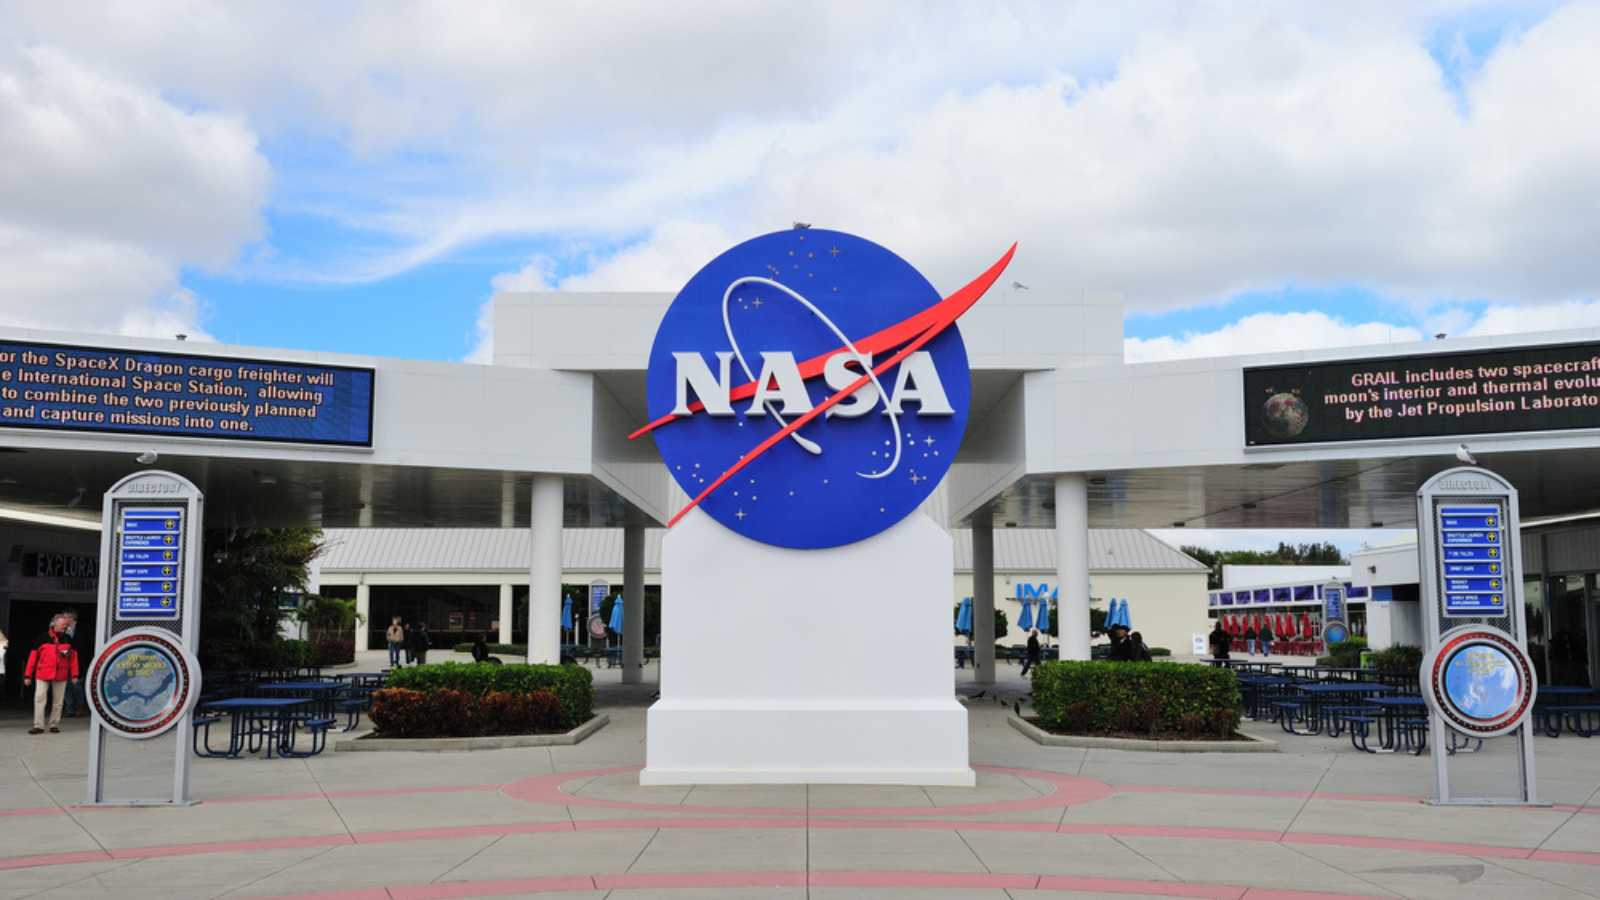 MERRITT ISLAND, FL - FEB 12: NASA in Kennedy Space Center on February 12, 2012 in Merritt Island, Florida. It is the launch site for every United States human space flight since 1968.